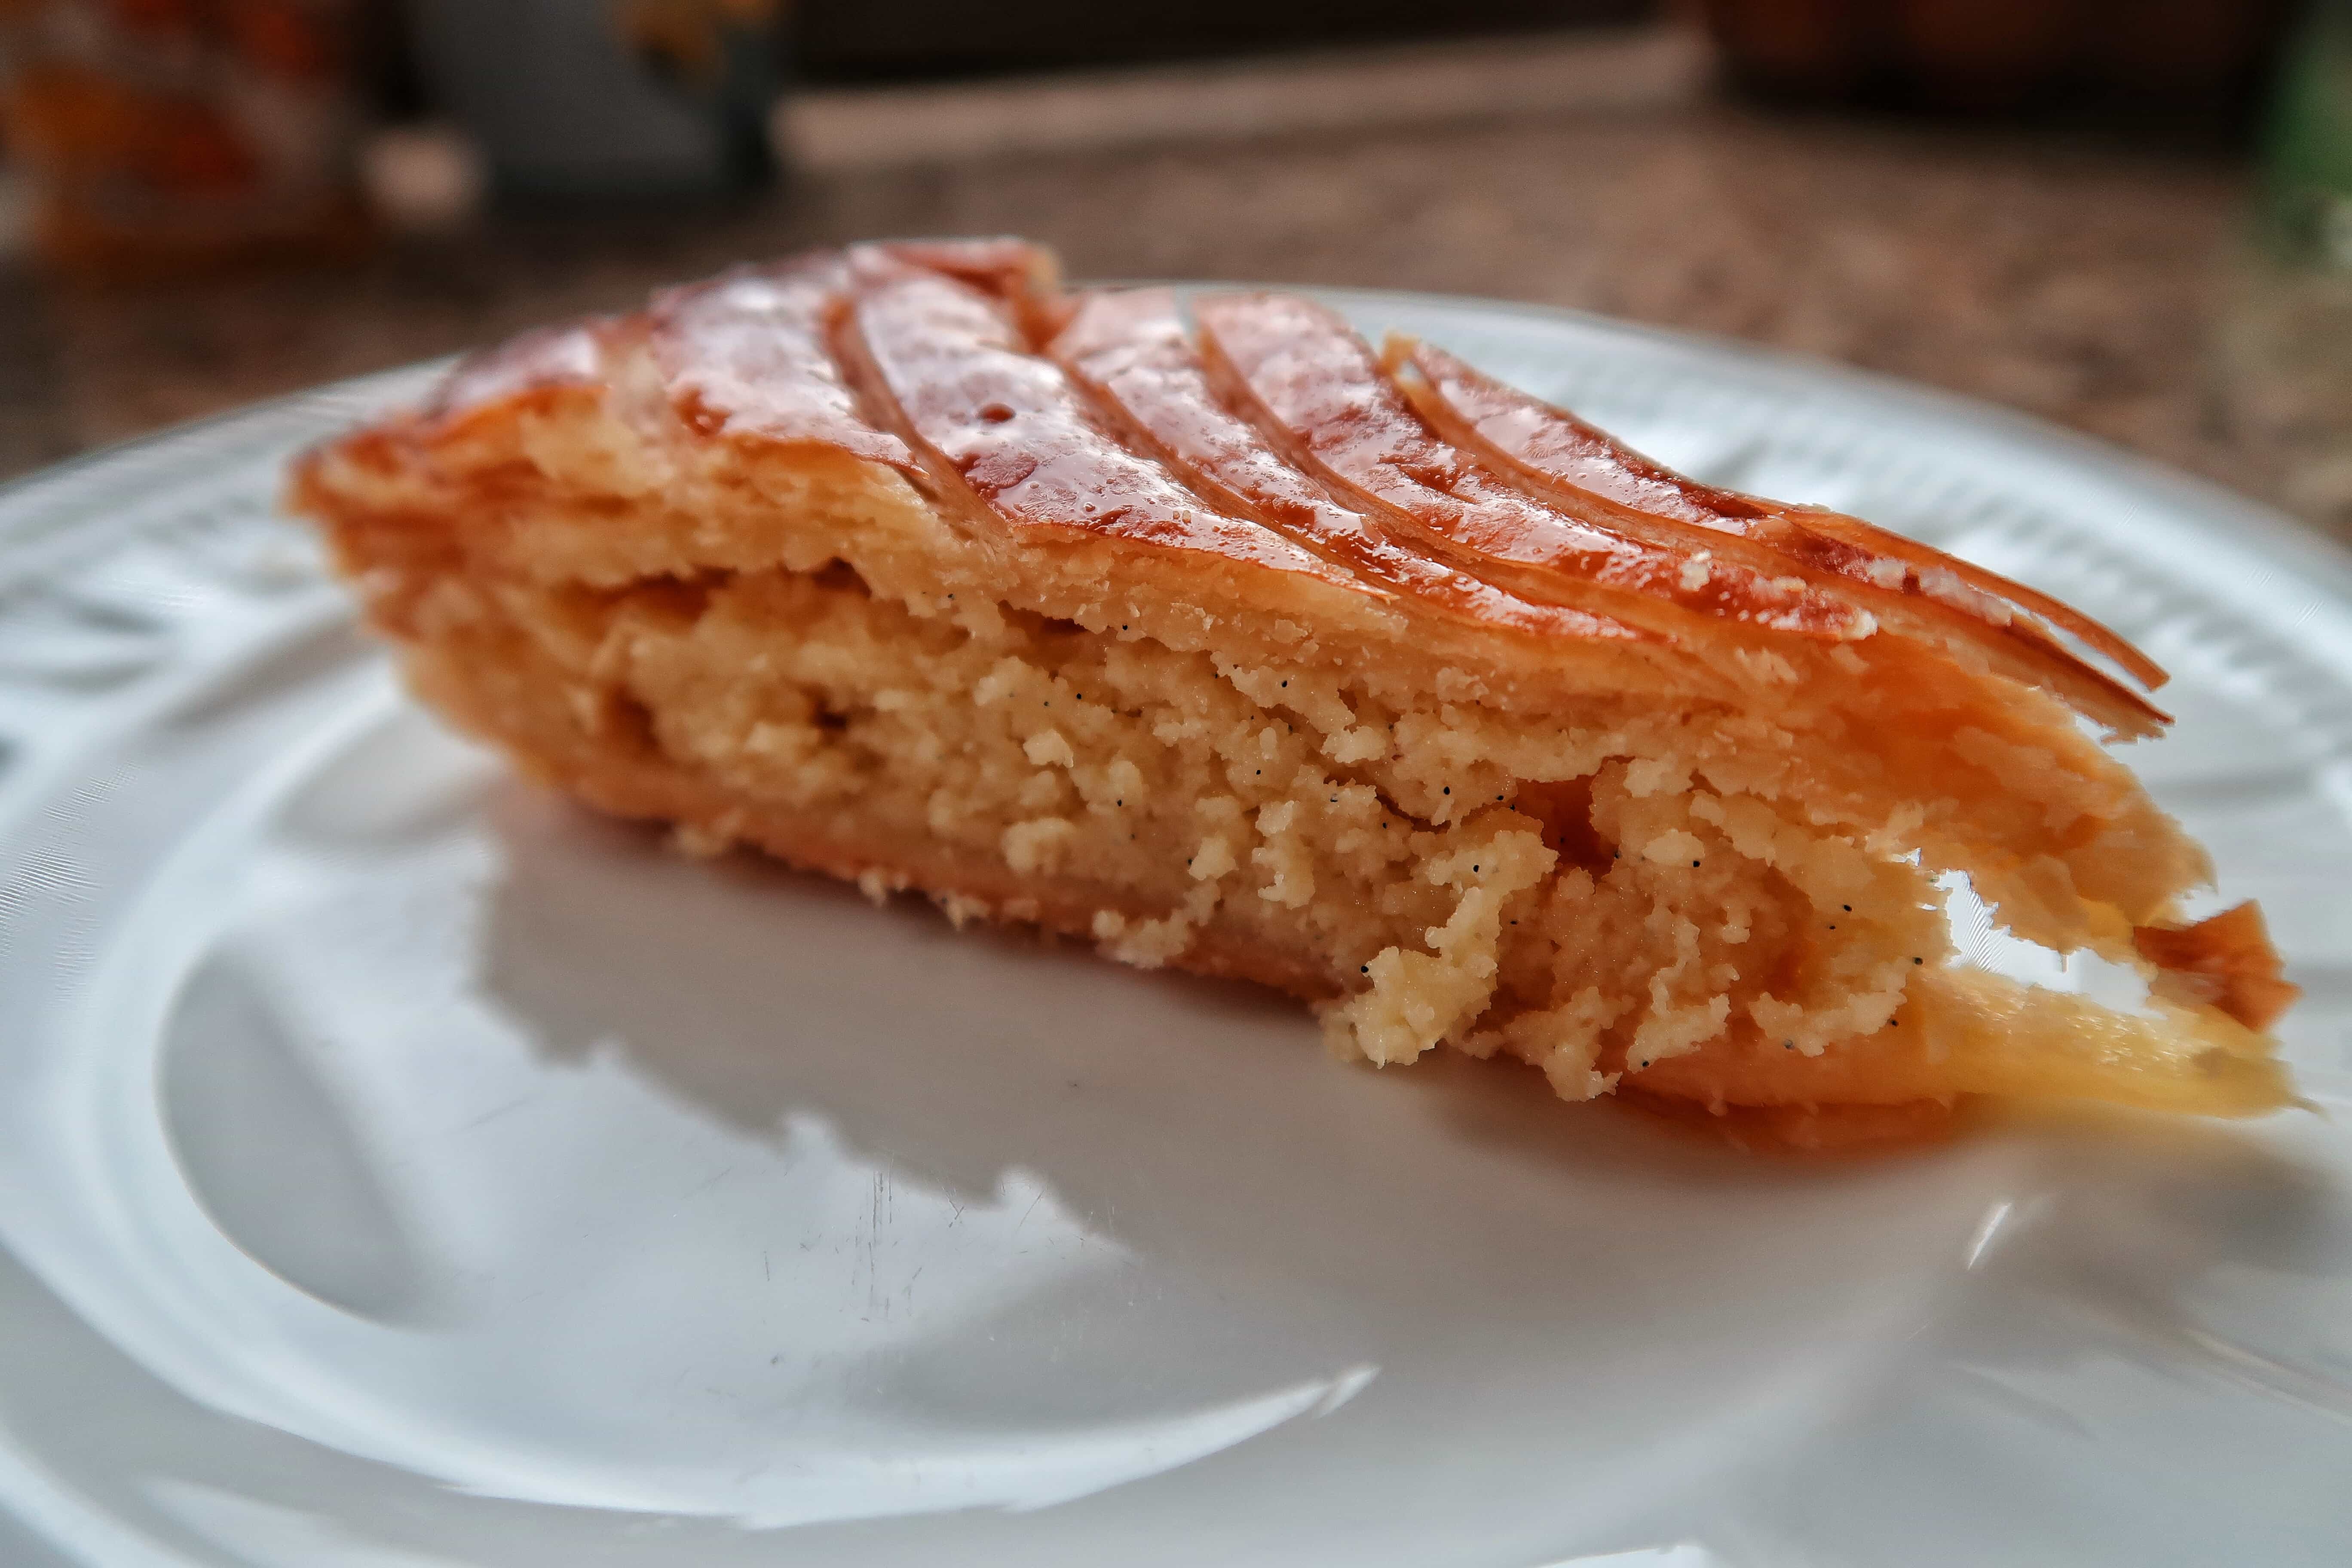 Galette des Rois - the French cake of Kings